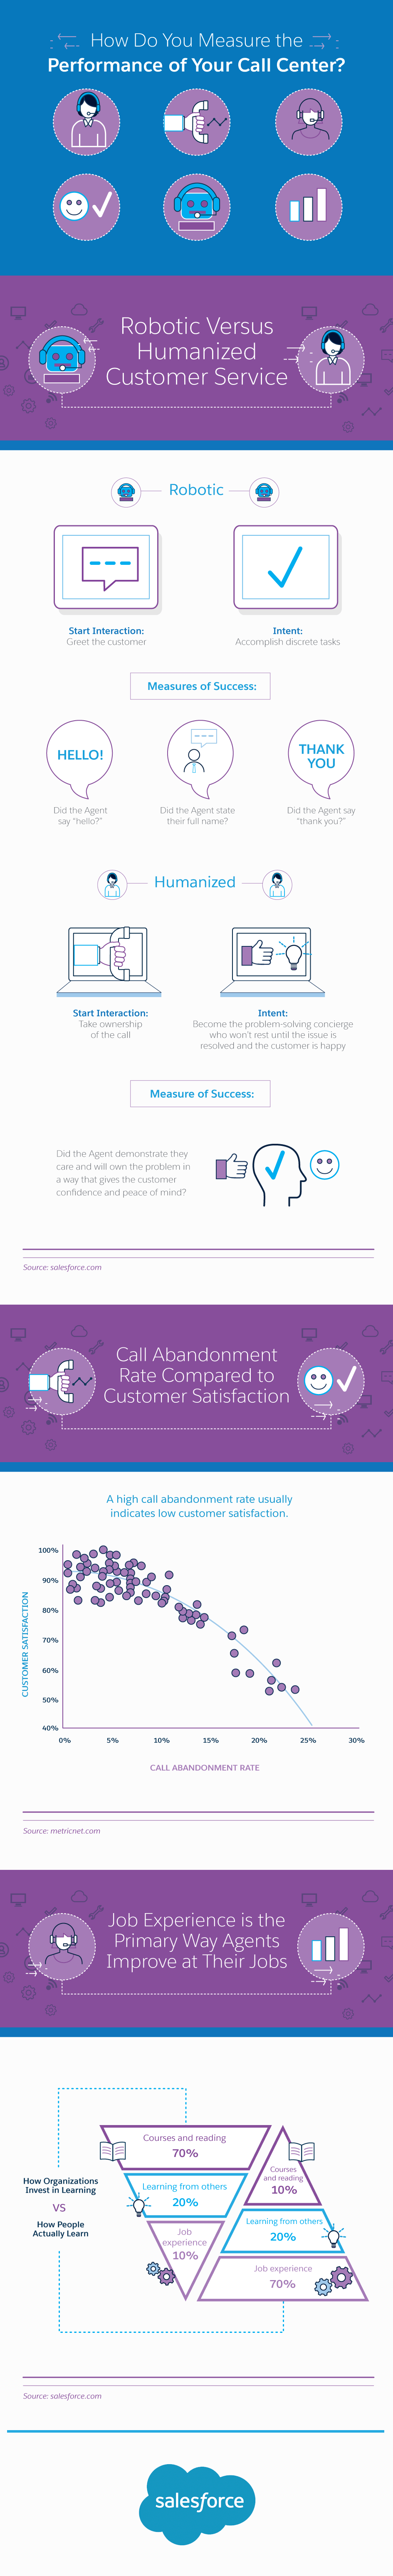 How Do You Measure the Performance of Your Call Center Infographic